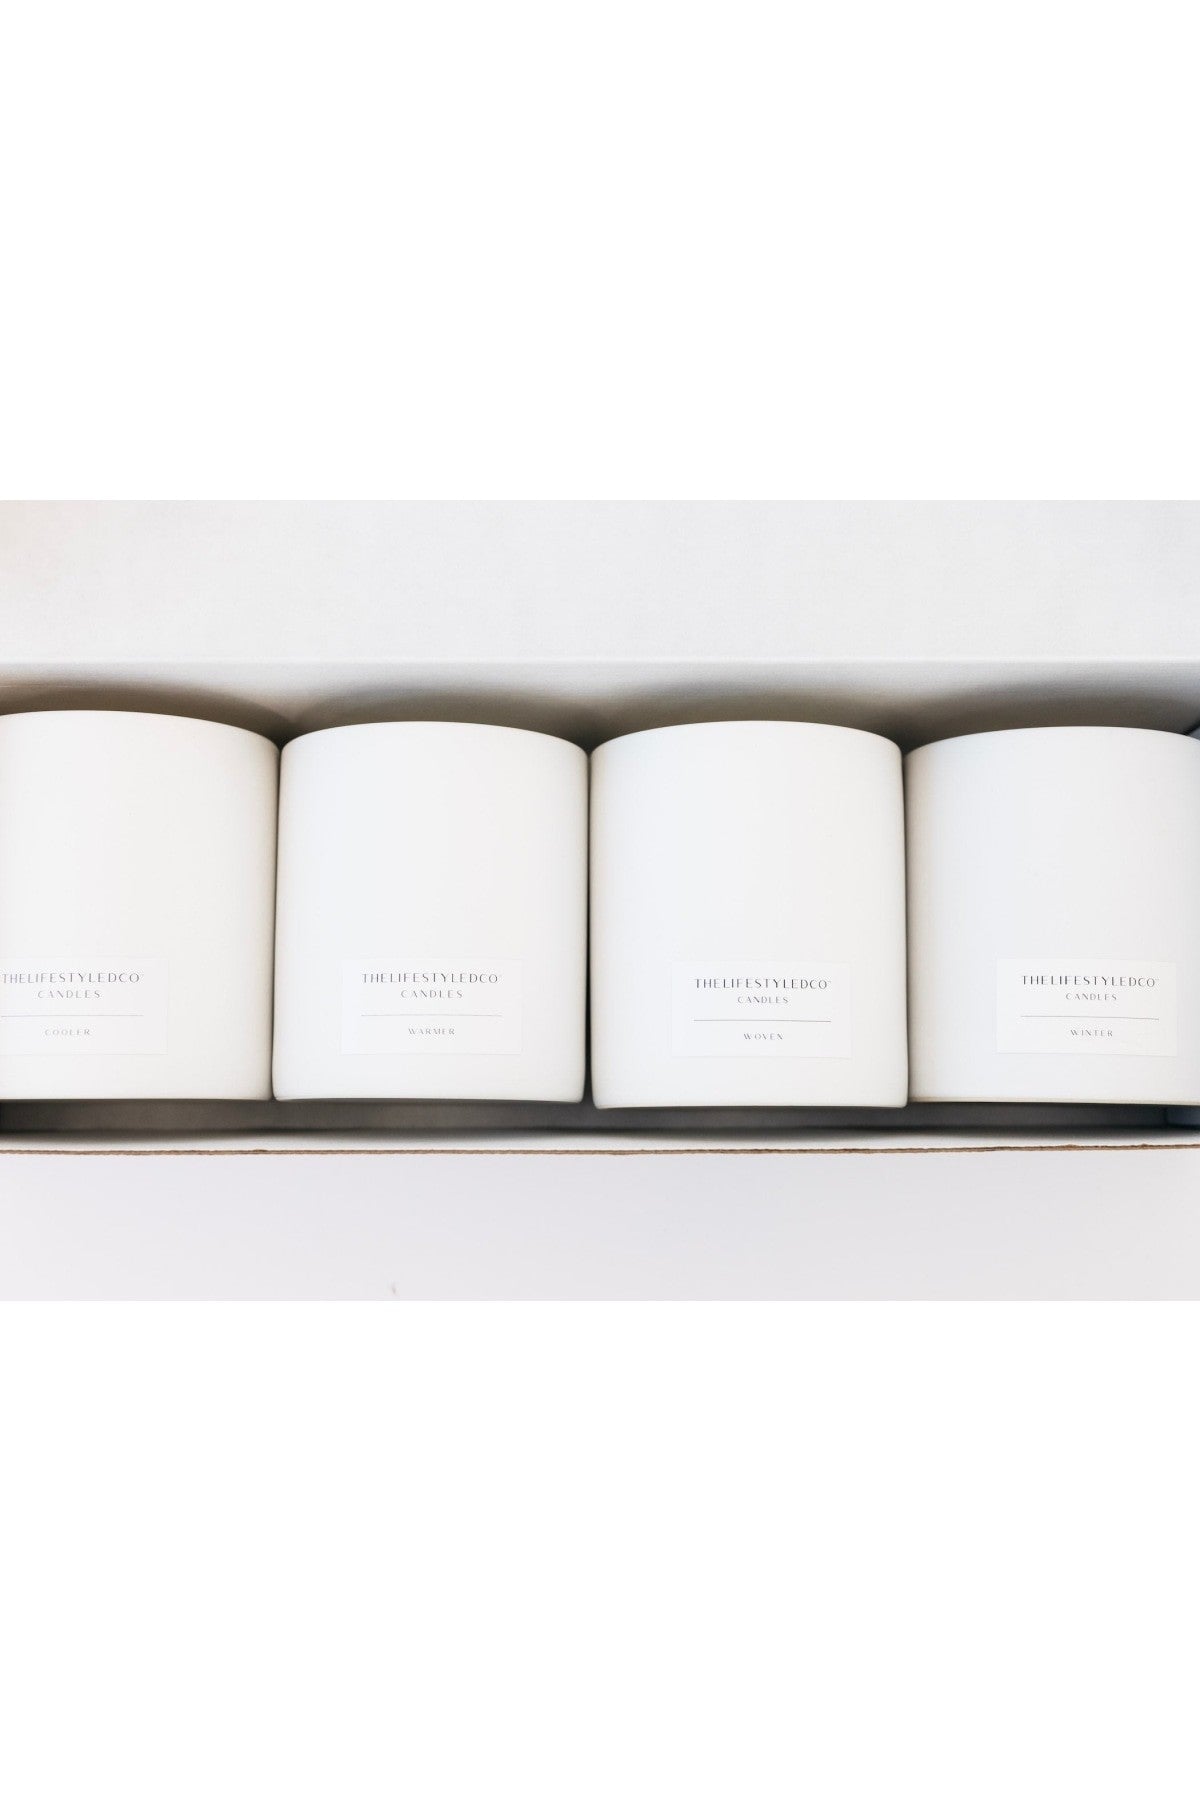 LCO Exclusive Candle Gifted Set Of 4